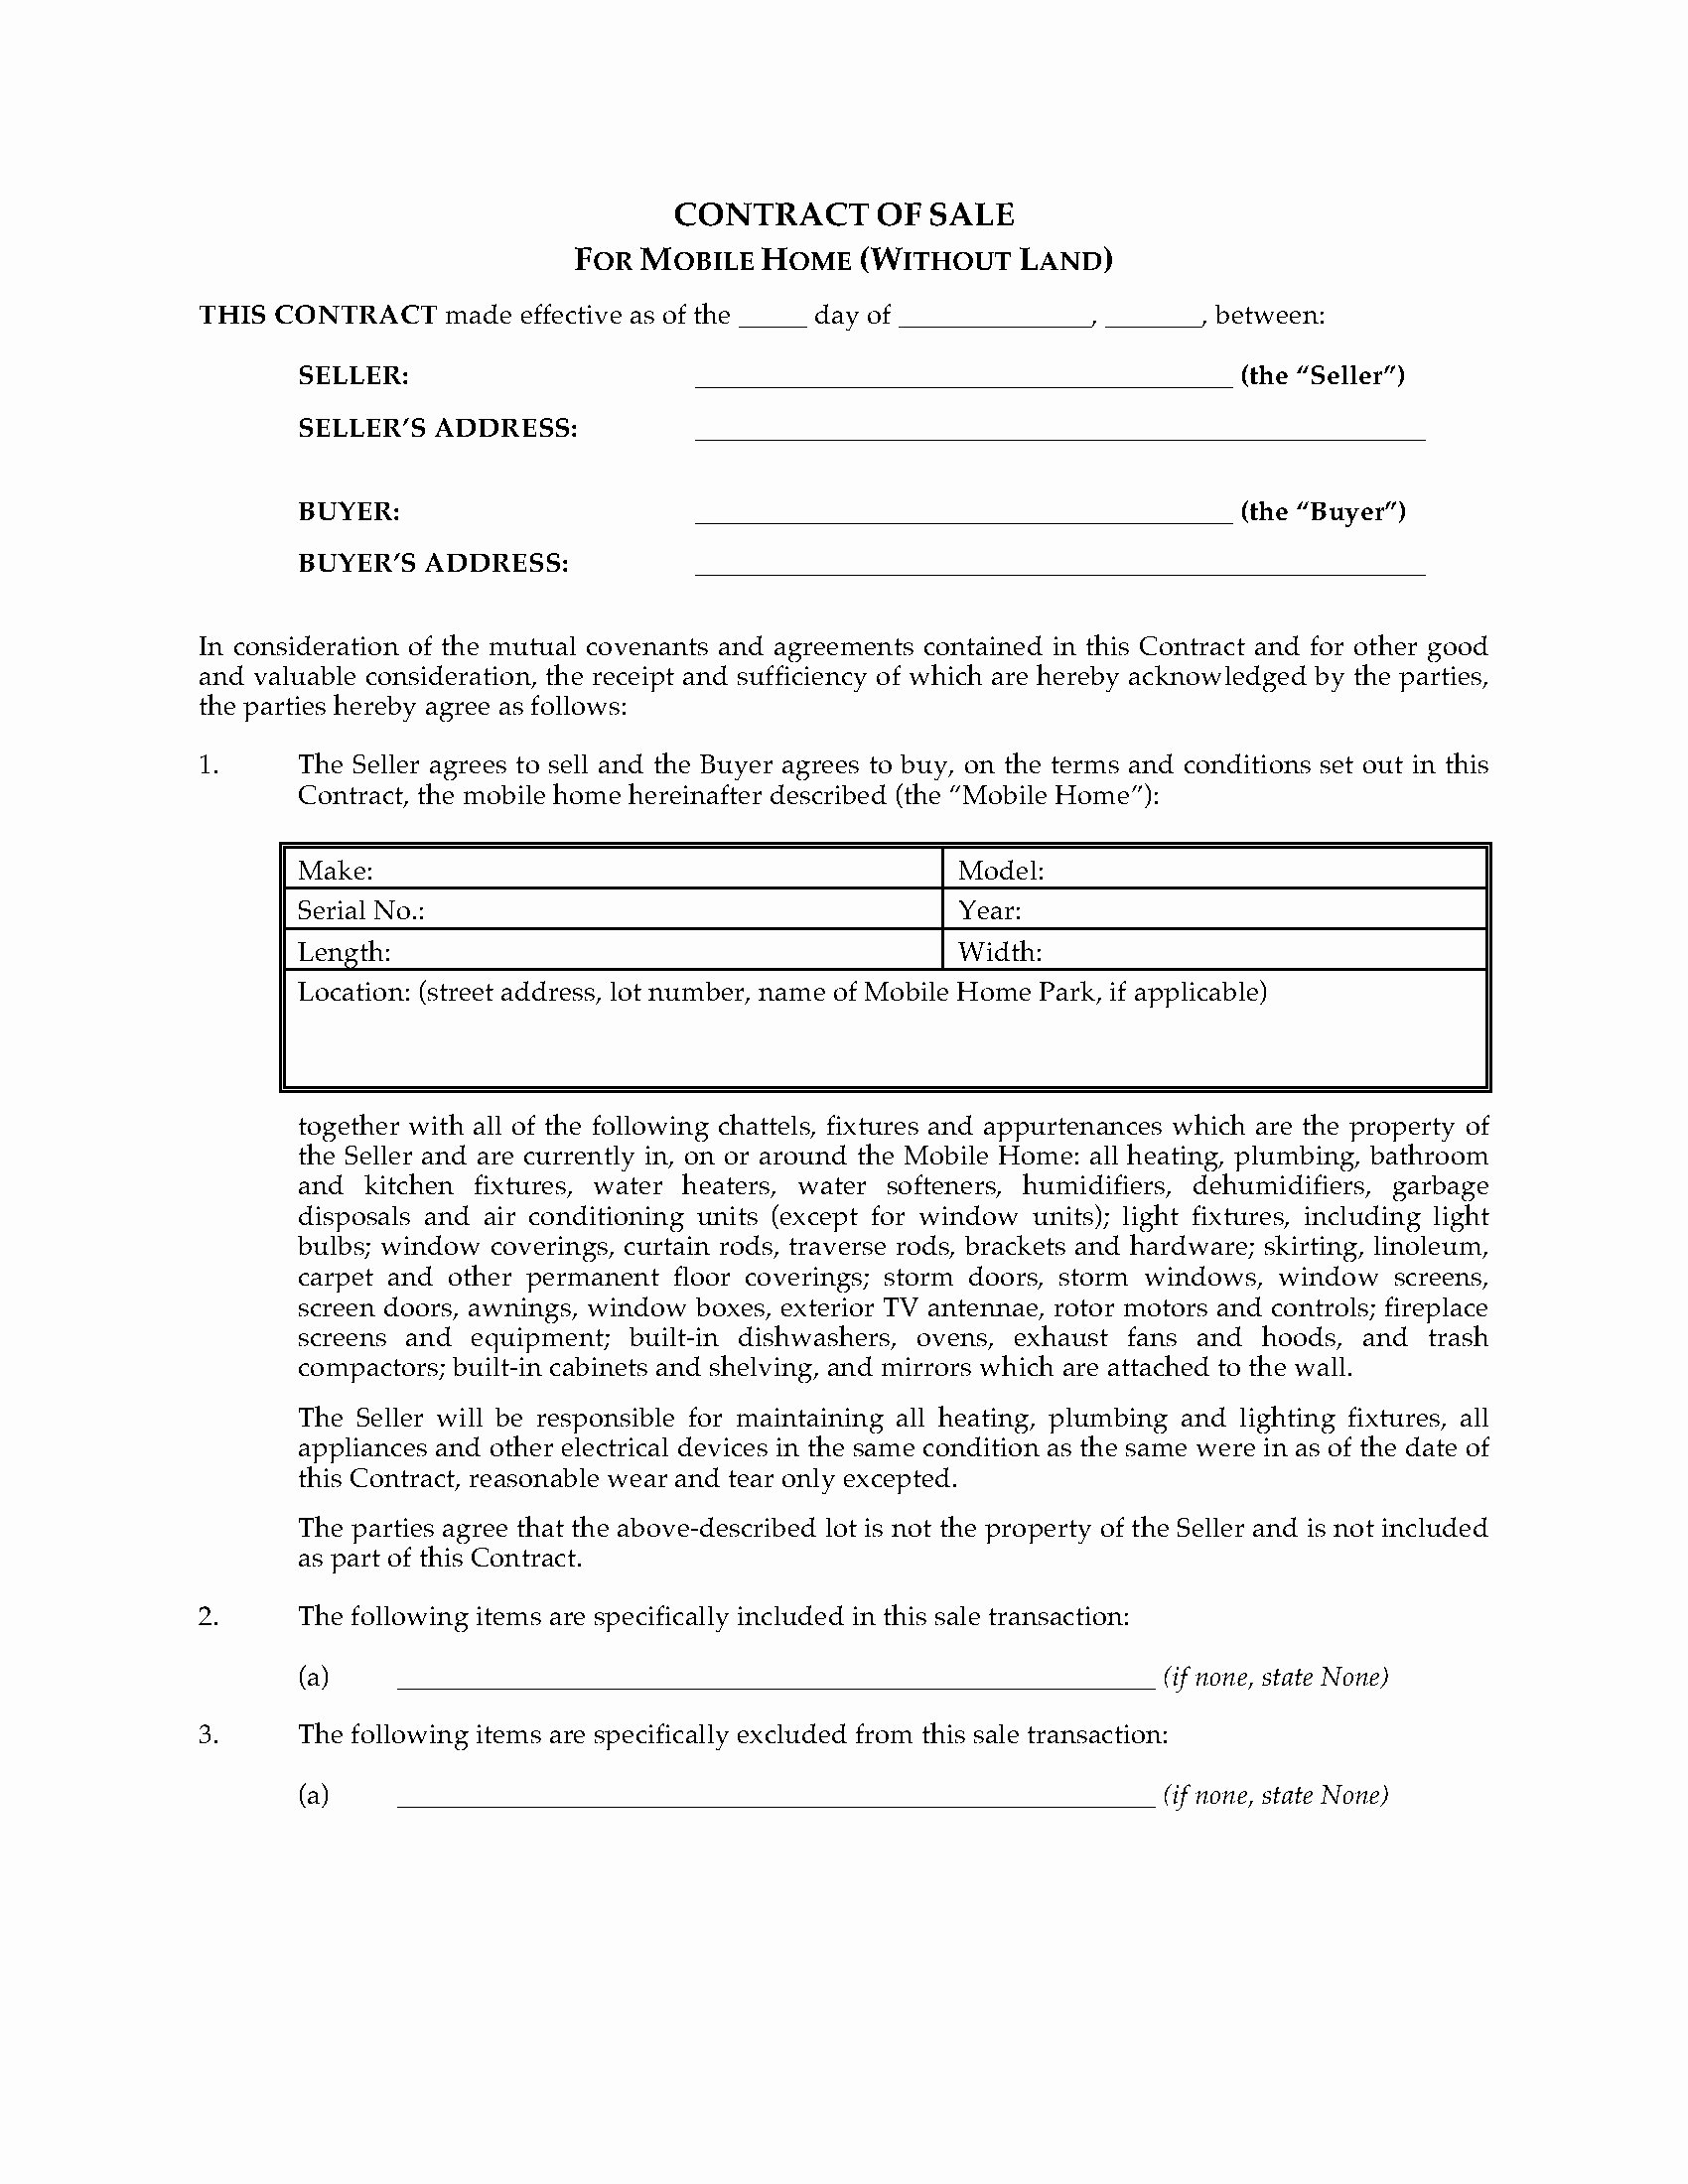 Home Purchase Contract Template Inspirational Usa Mobile Home Sale Contract